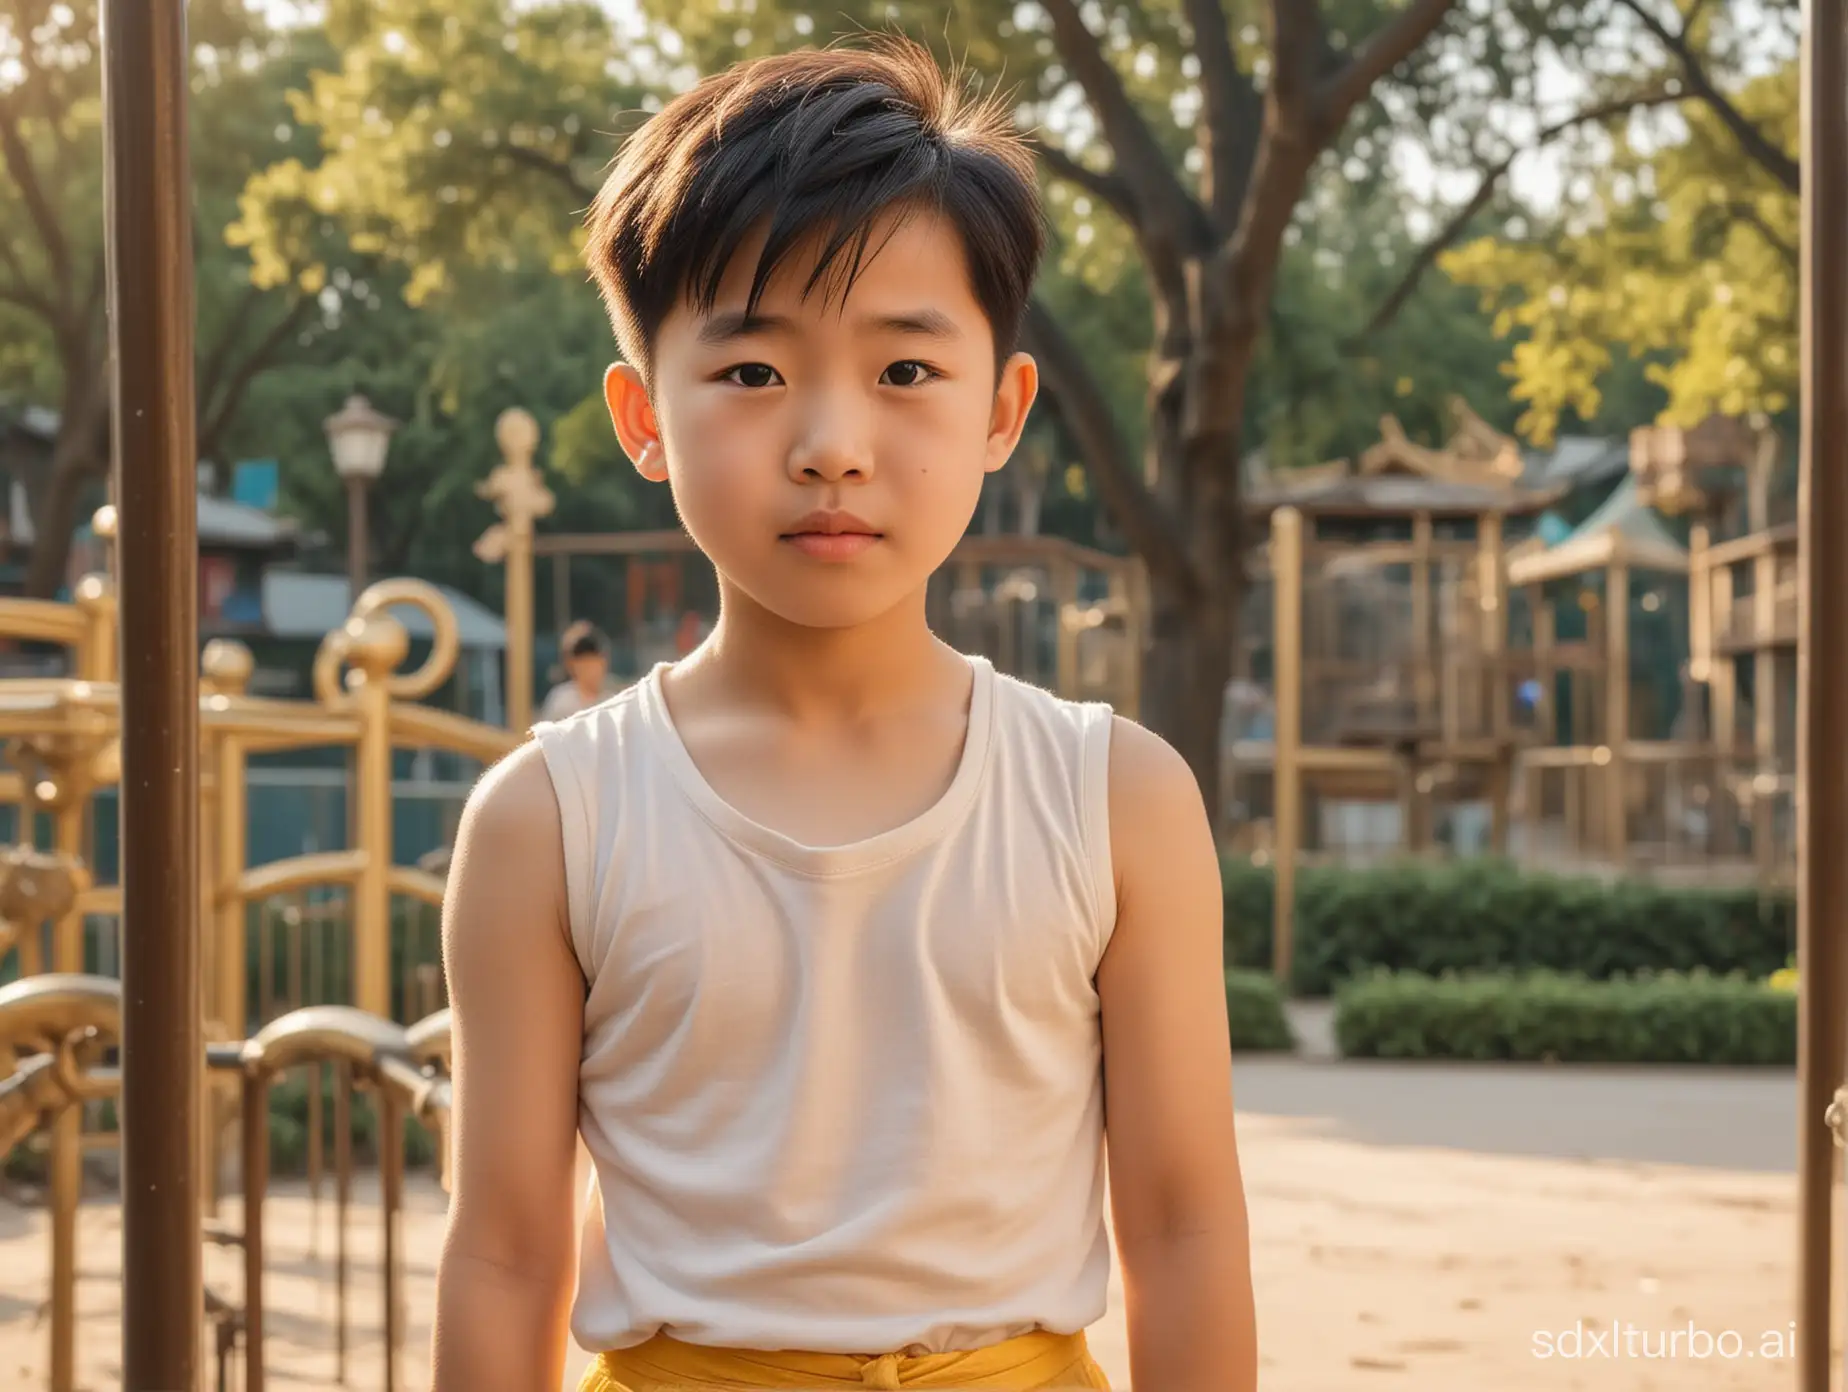 A cute little Chinese boy, full body, facing the camera, able to see facial features and shaved short hair on the sides, bravely transforms into a golden Disney princess, standing on the playground, the boy is upset that his so-called friend is bullying him, photo style